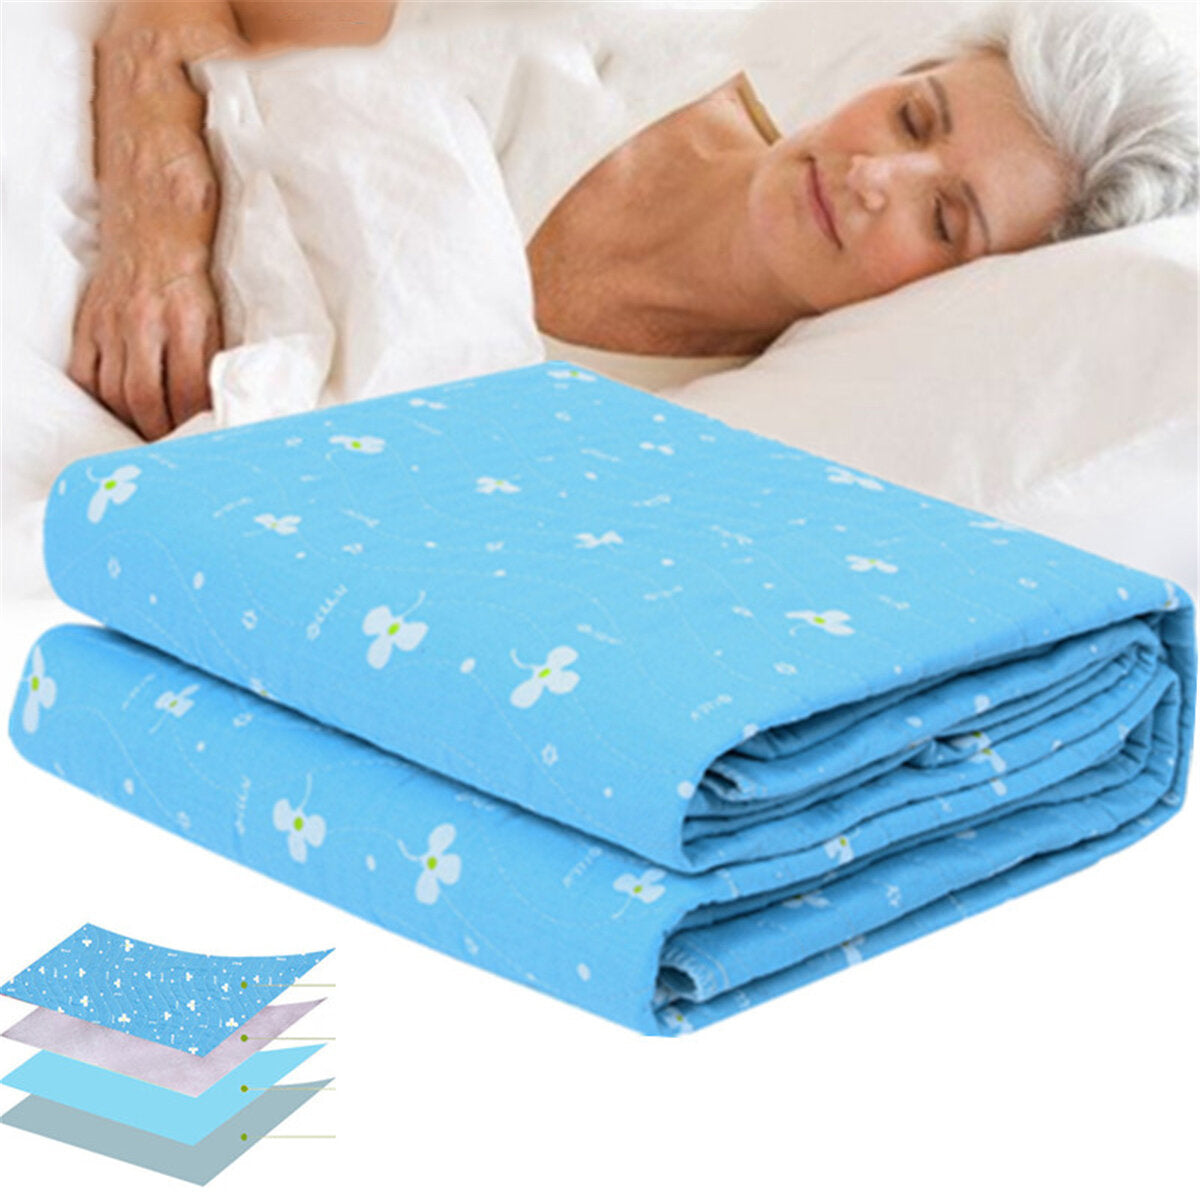 3 Sizes Waterproof Washable Reusable Anti Incontinence Bed Mattress For Kids Adults Cotton Material Comfortable Cushion